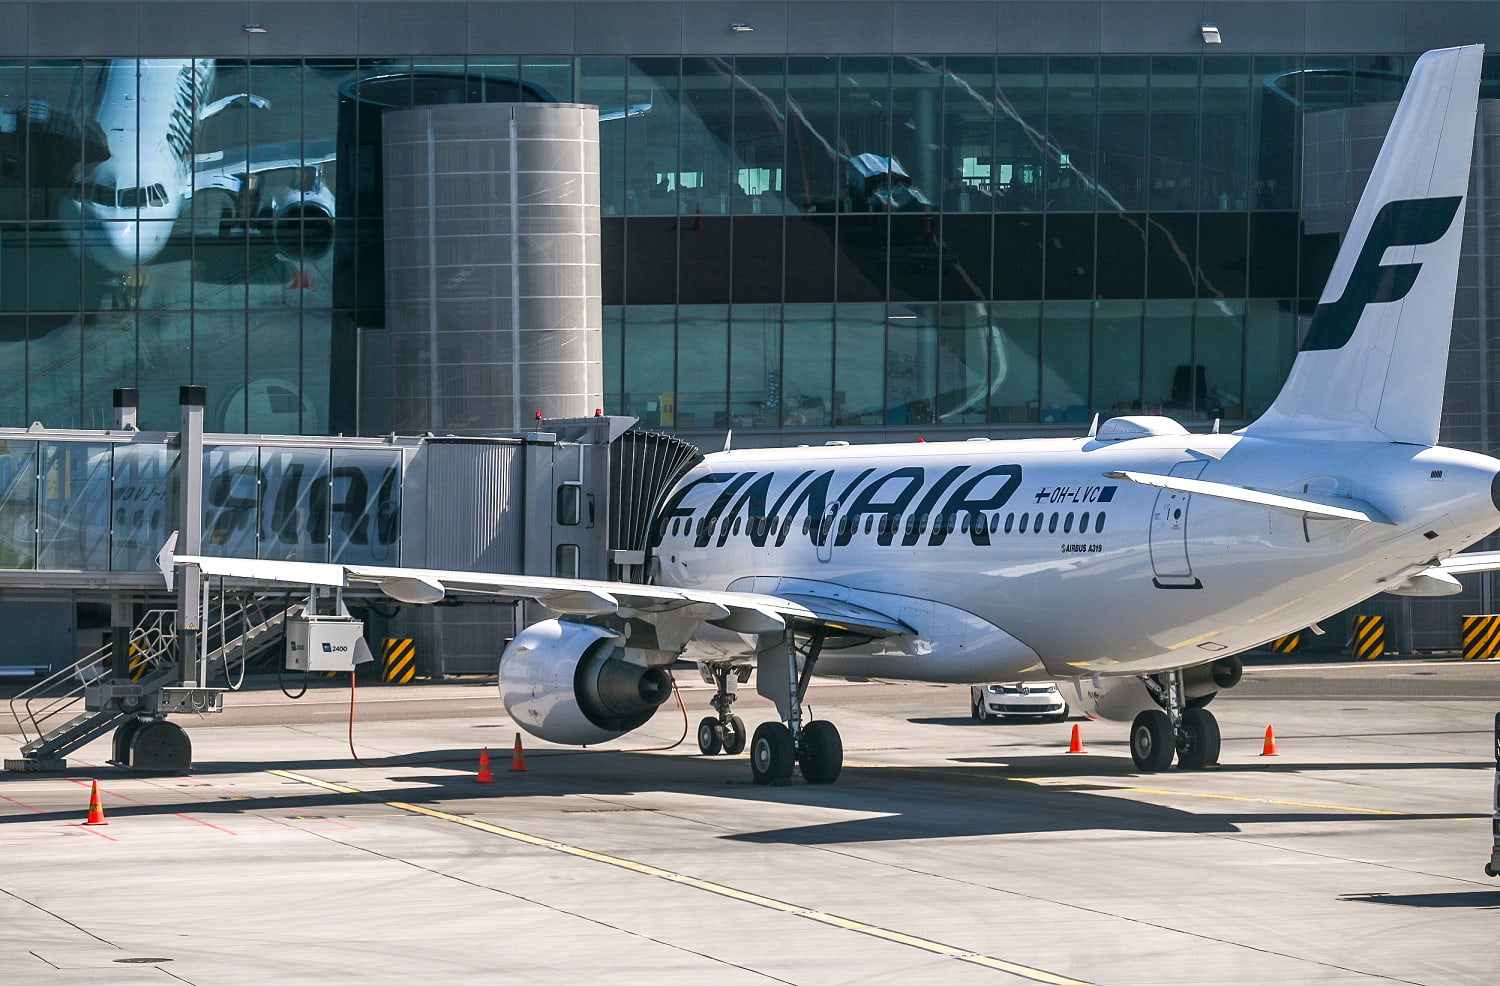 Airline Finnair weighing passengers at departure gates for data collection